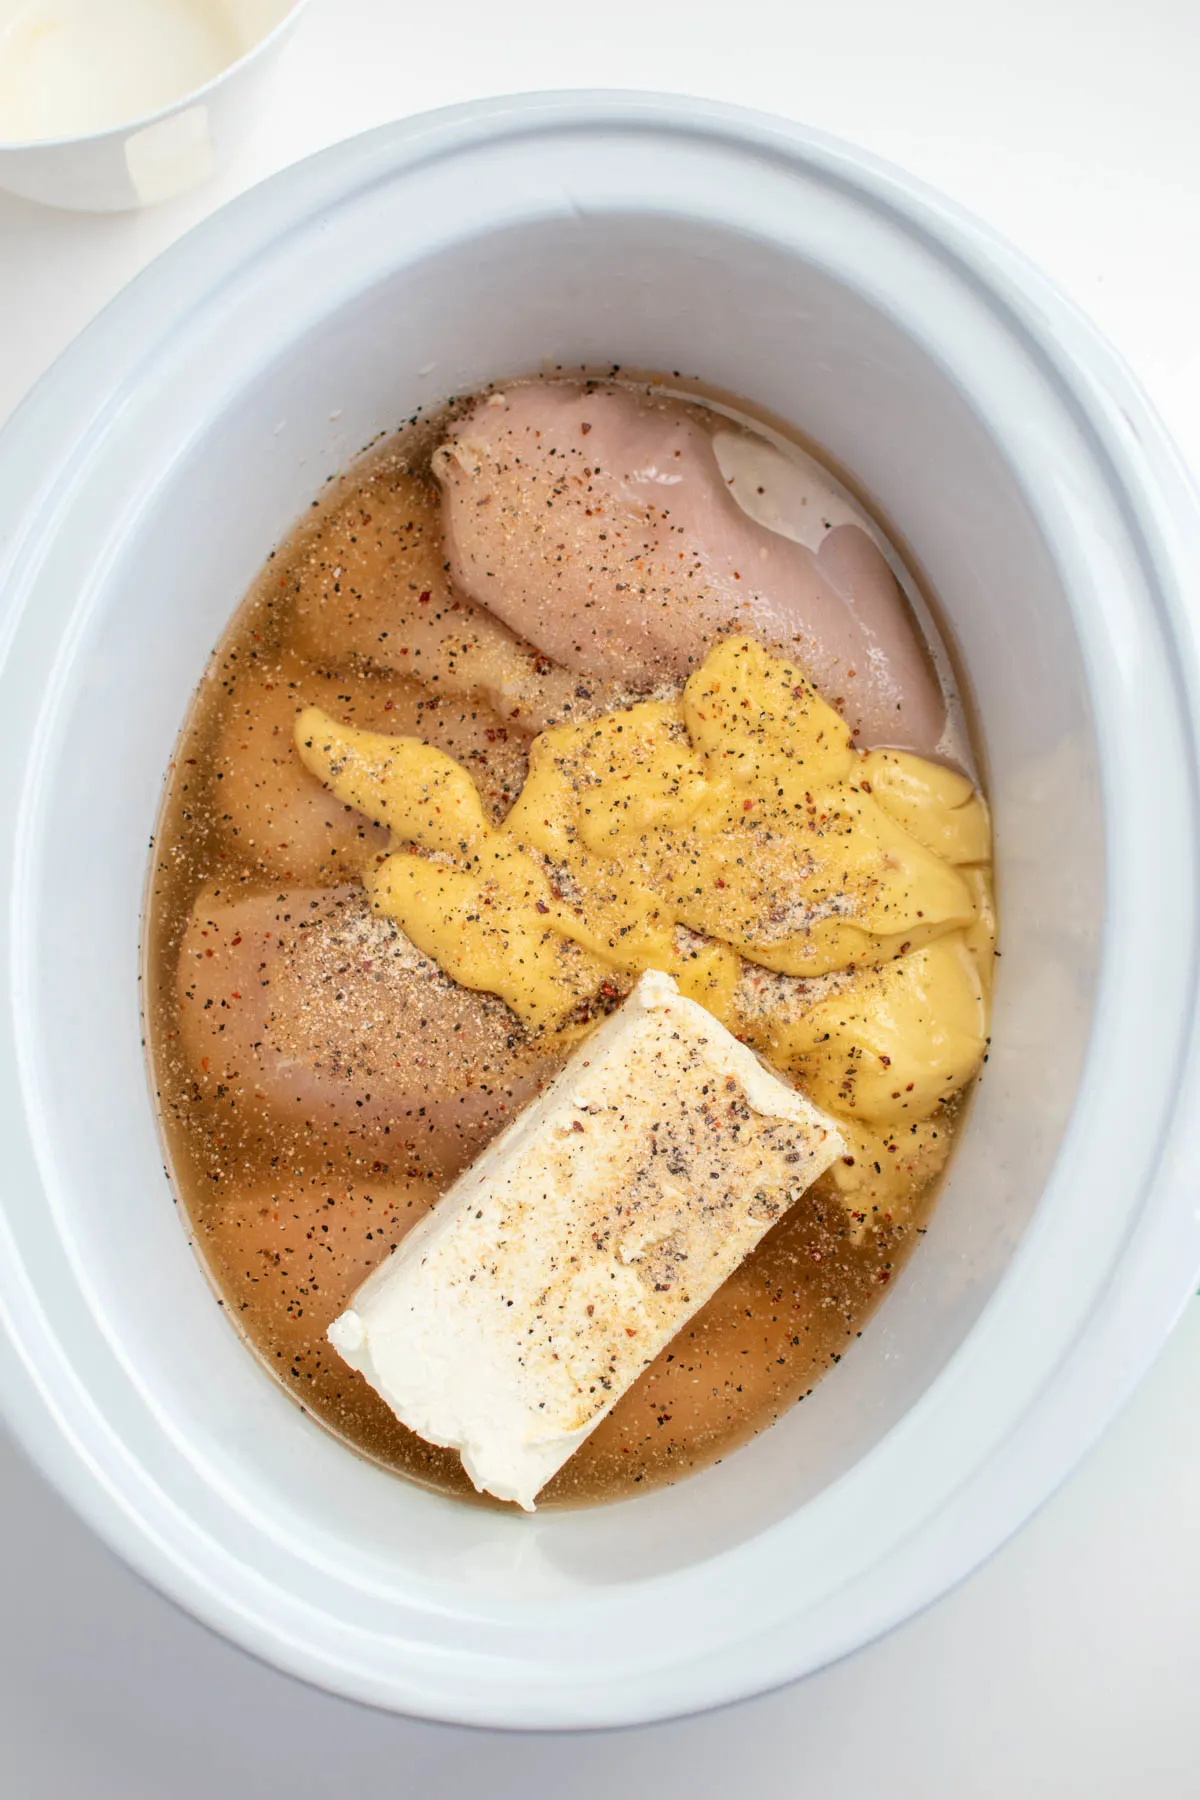 Block of cream cheese, cream of chicken soup, and raw chicken breasts in Crock Pot insert.